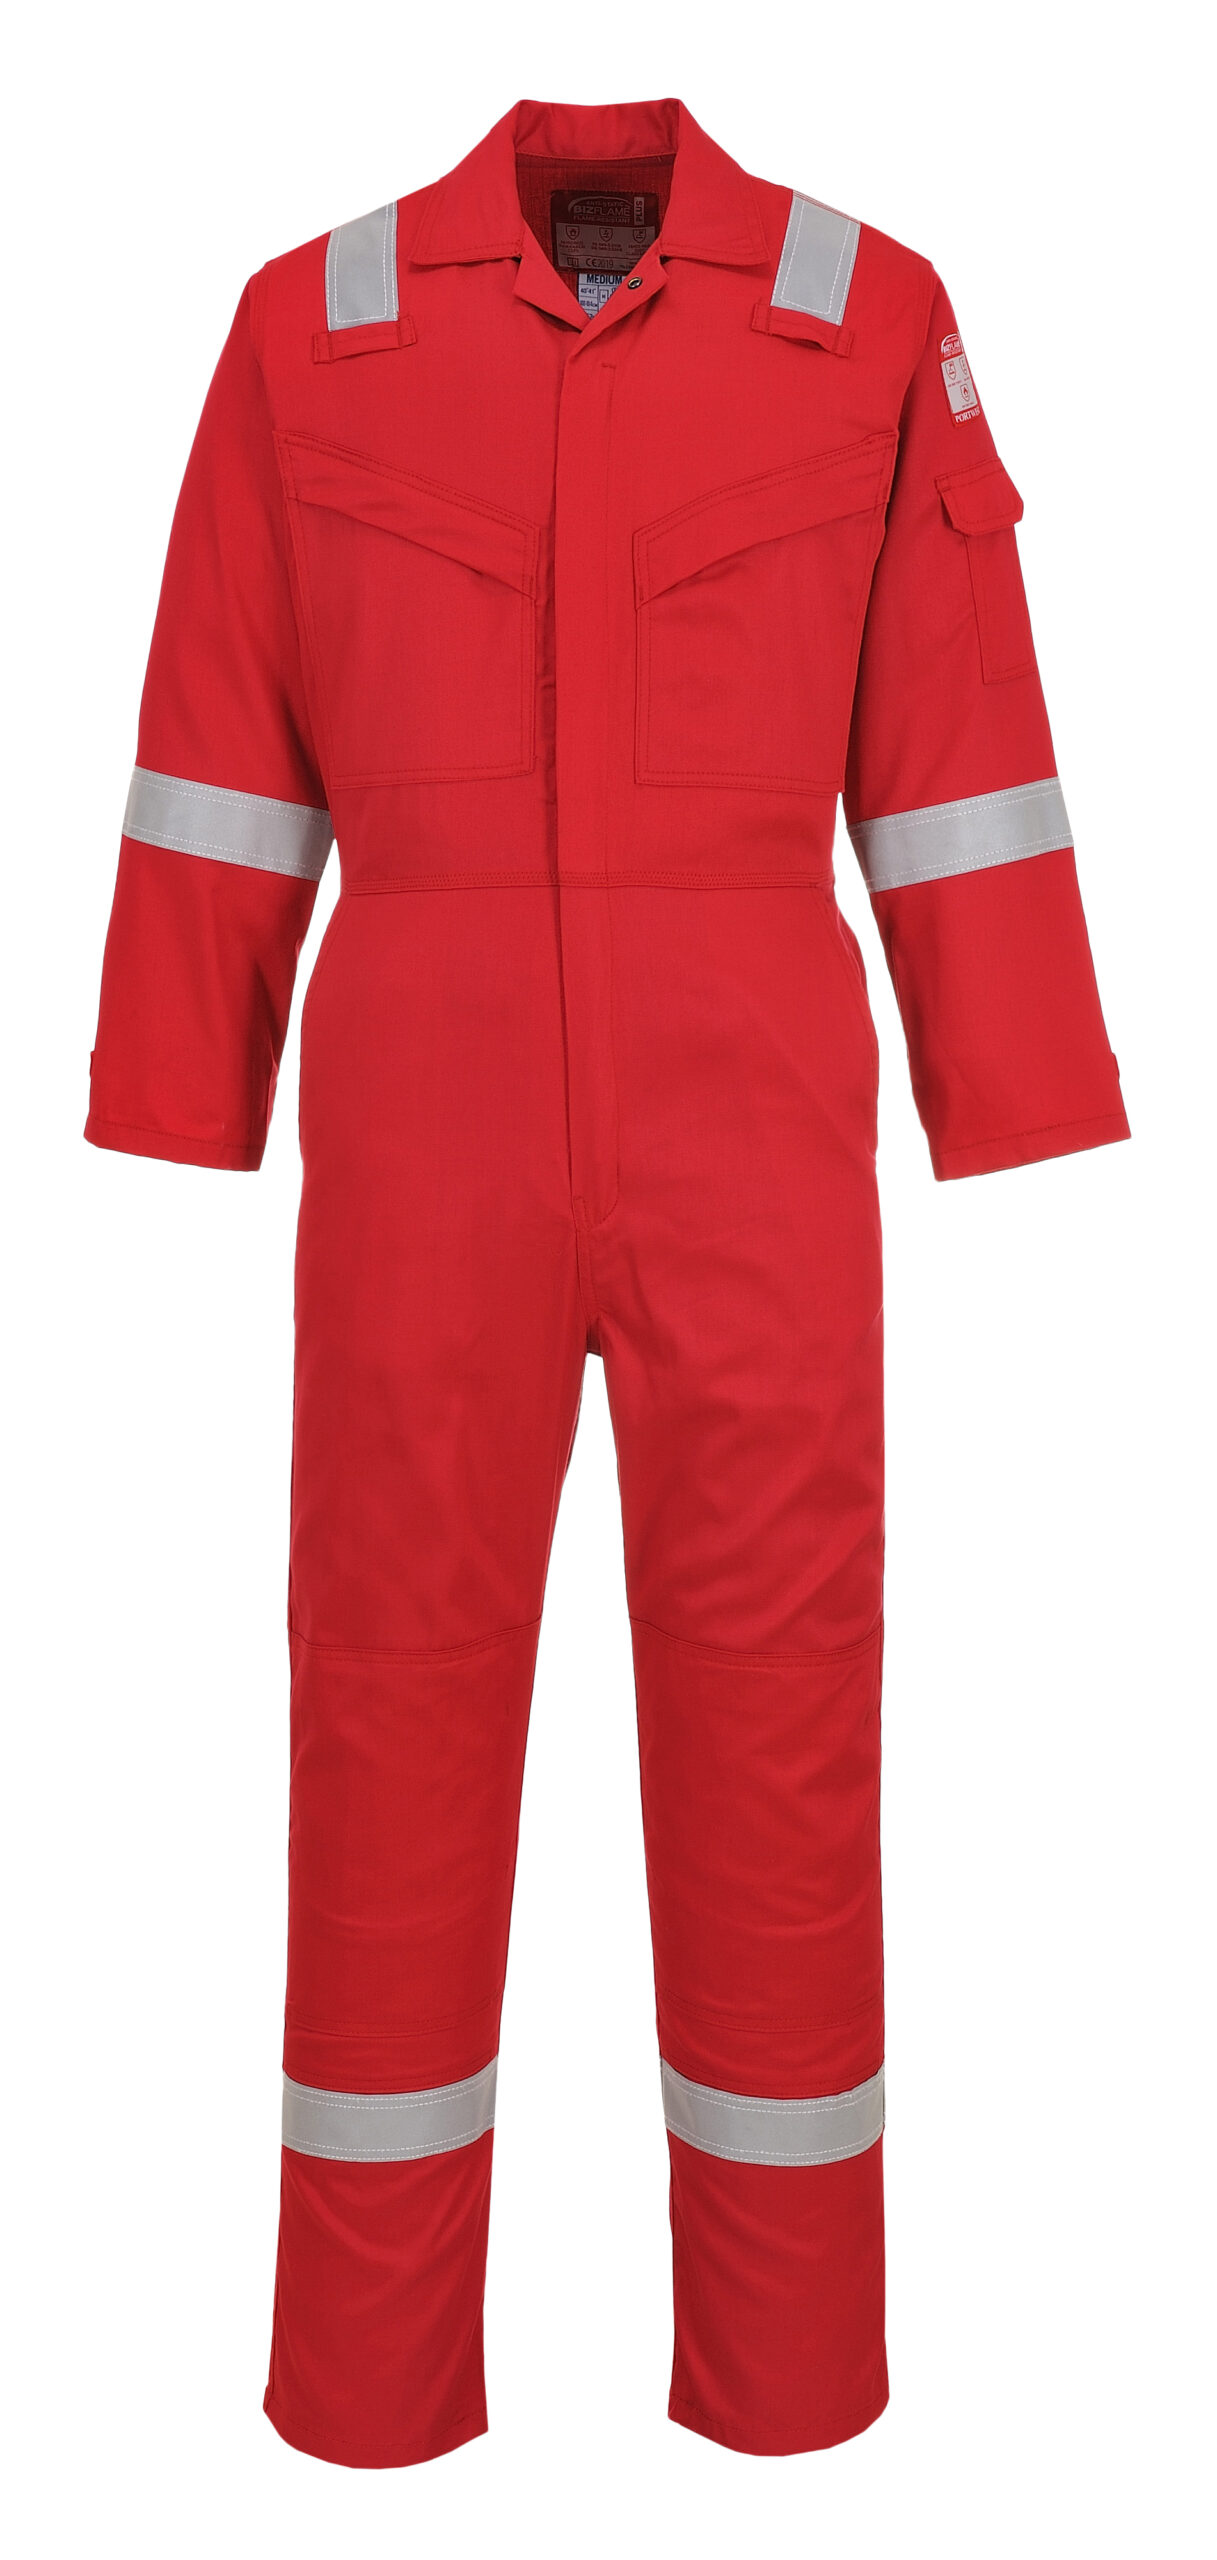 Portwest FR21 Super Light Weight Anti-Static Flame Retardant Coverall-0